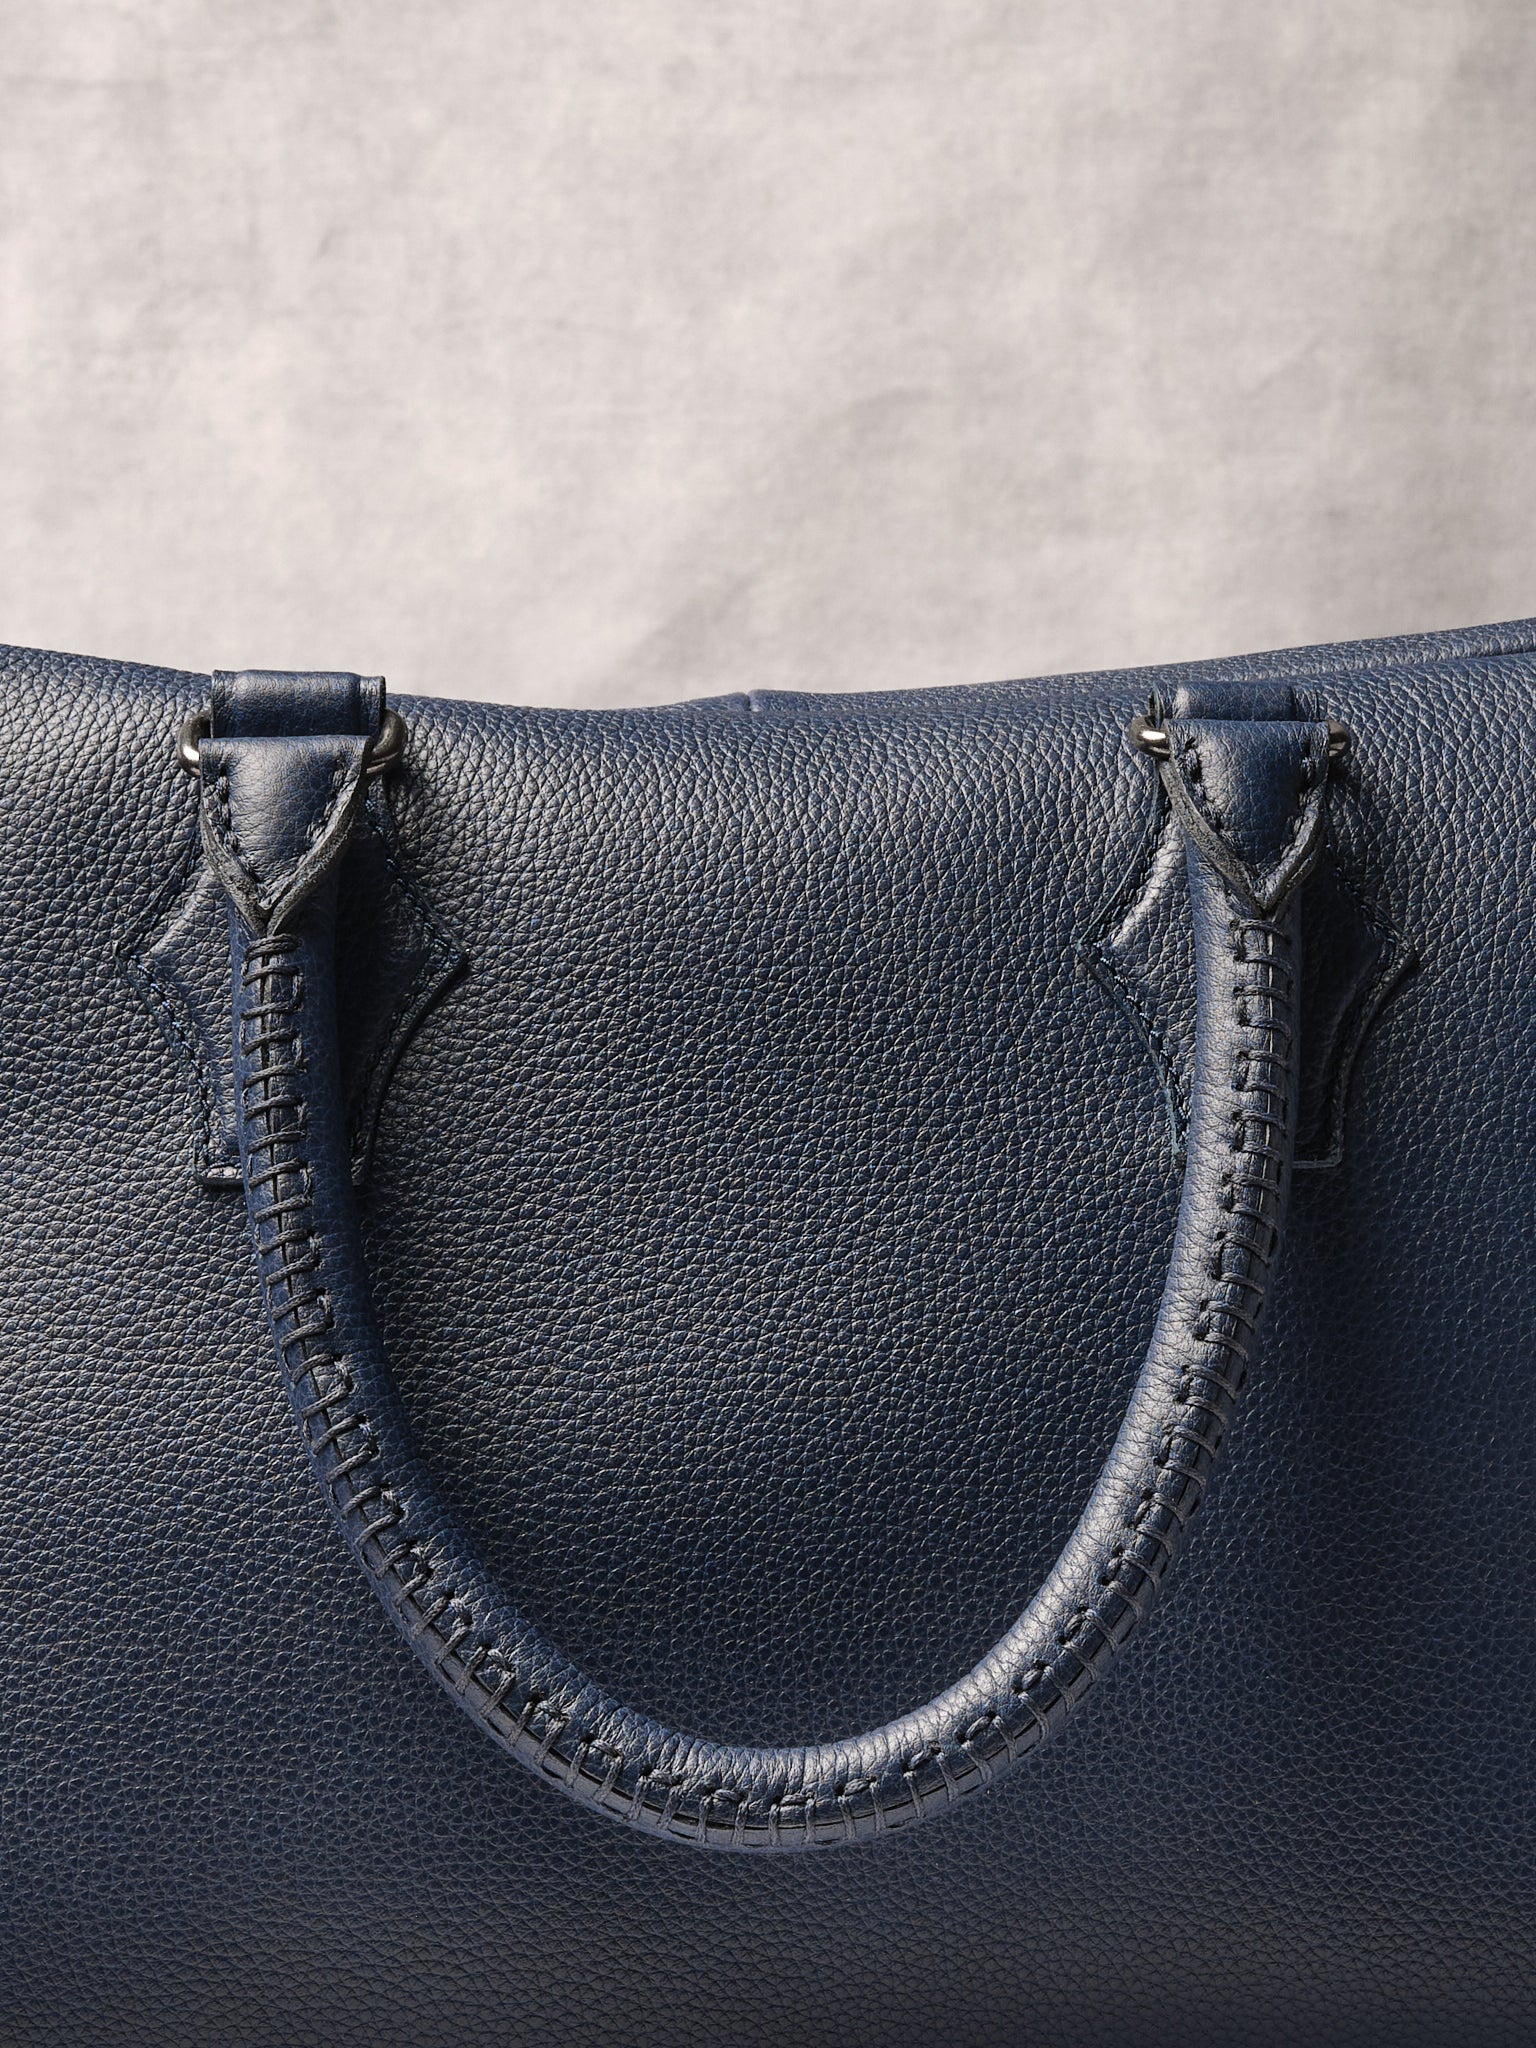 Cylindrical Hand-stitched Handles. Weekender Bag Navy by Capra Leather